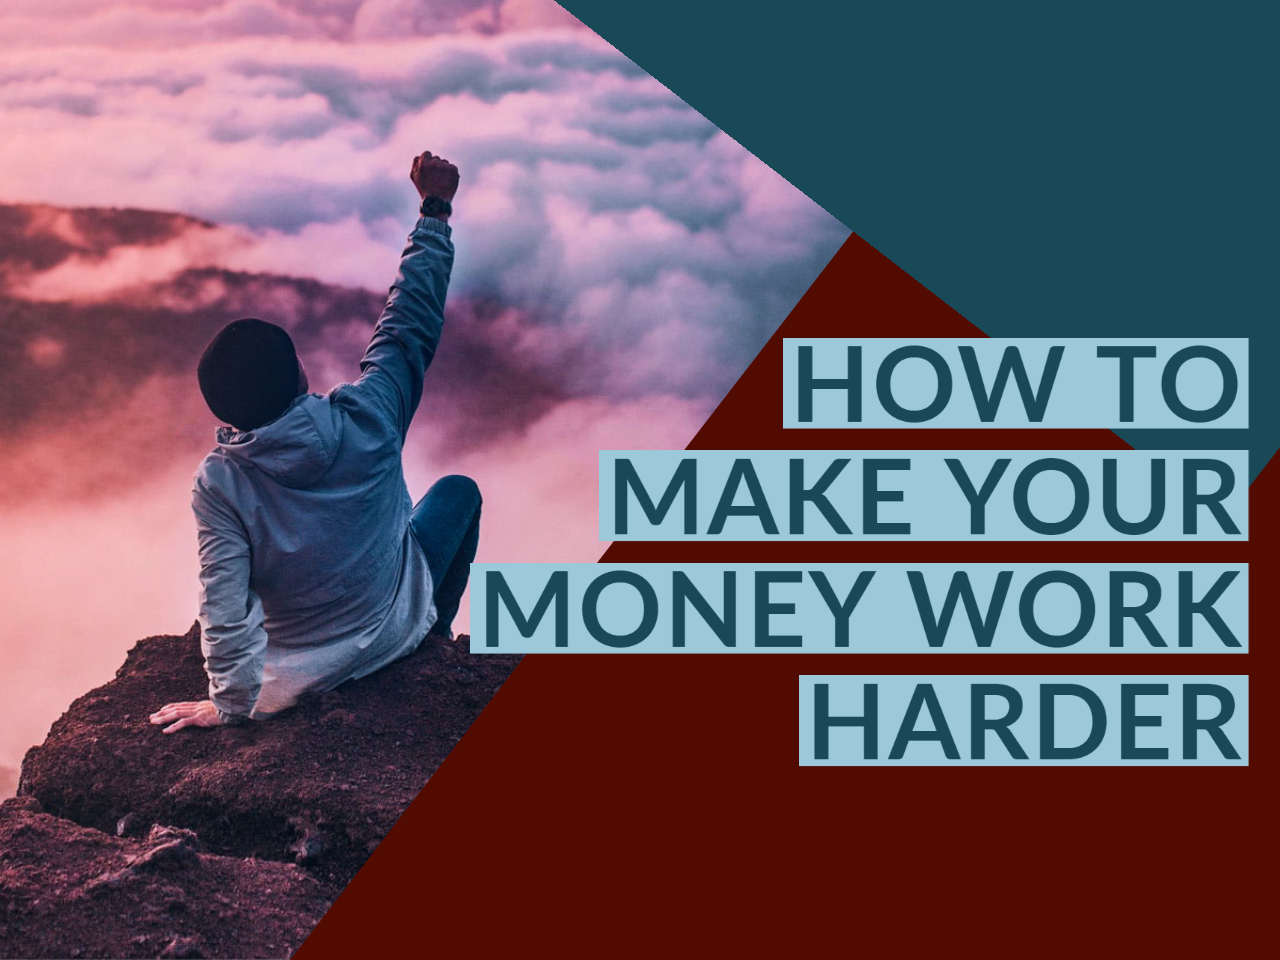 How To Make Your Money Work Harder